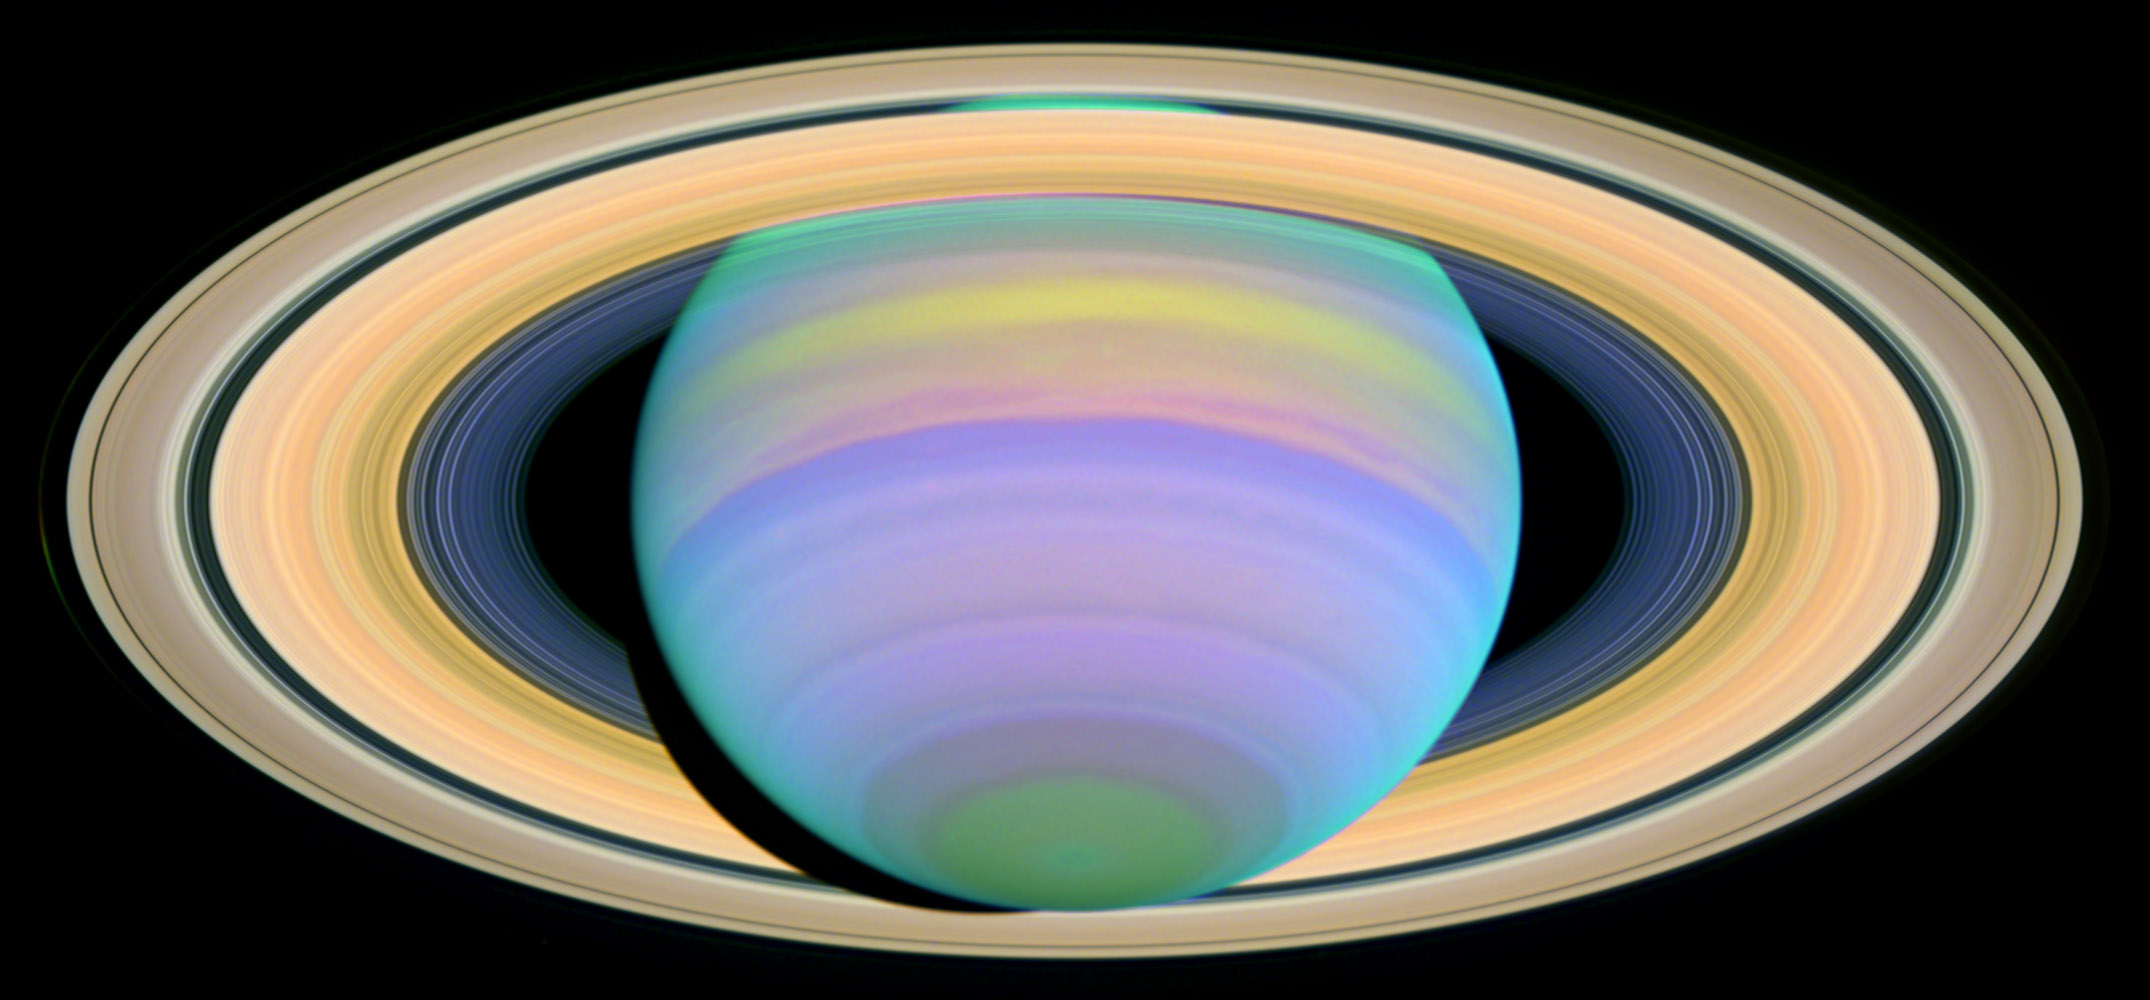 A breathtaking Hubble image of Saturn in ultraviolet light, showing the planet’s southern hemisphere and the southern face of its rings. A new study has proposed utilising the observing capabilities of Hubble together with the upcoming James Webb Space Telescope, for capturing stereoscopic 3-D images of planets in the Solar System. Image Credit: NASA/ESA and E. Karkoschka (University of Arizona)